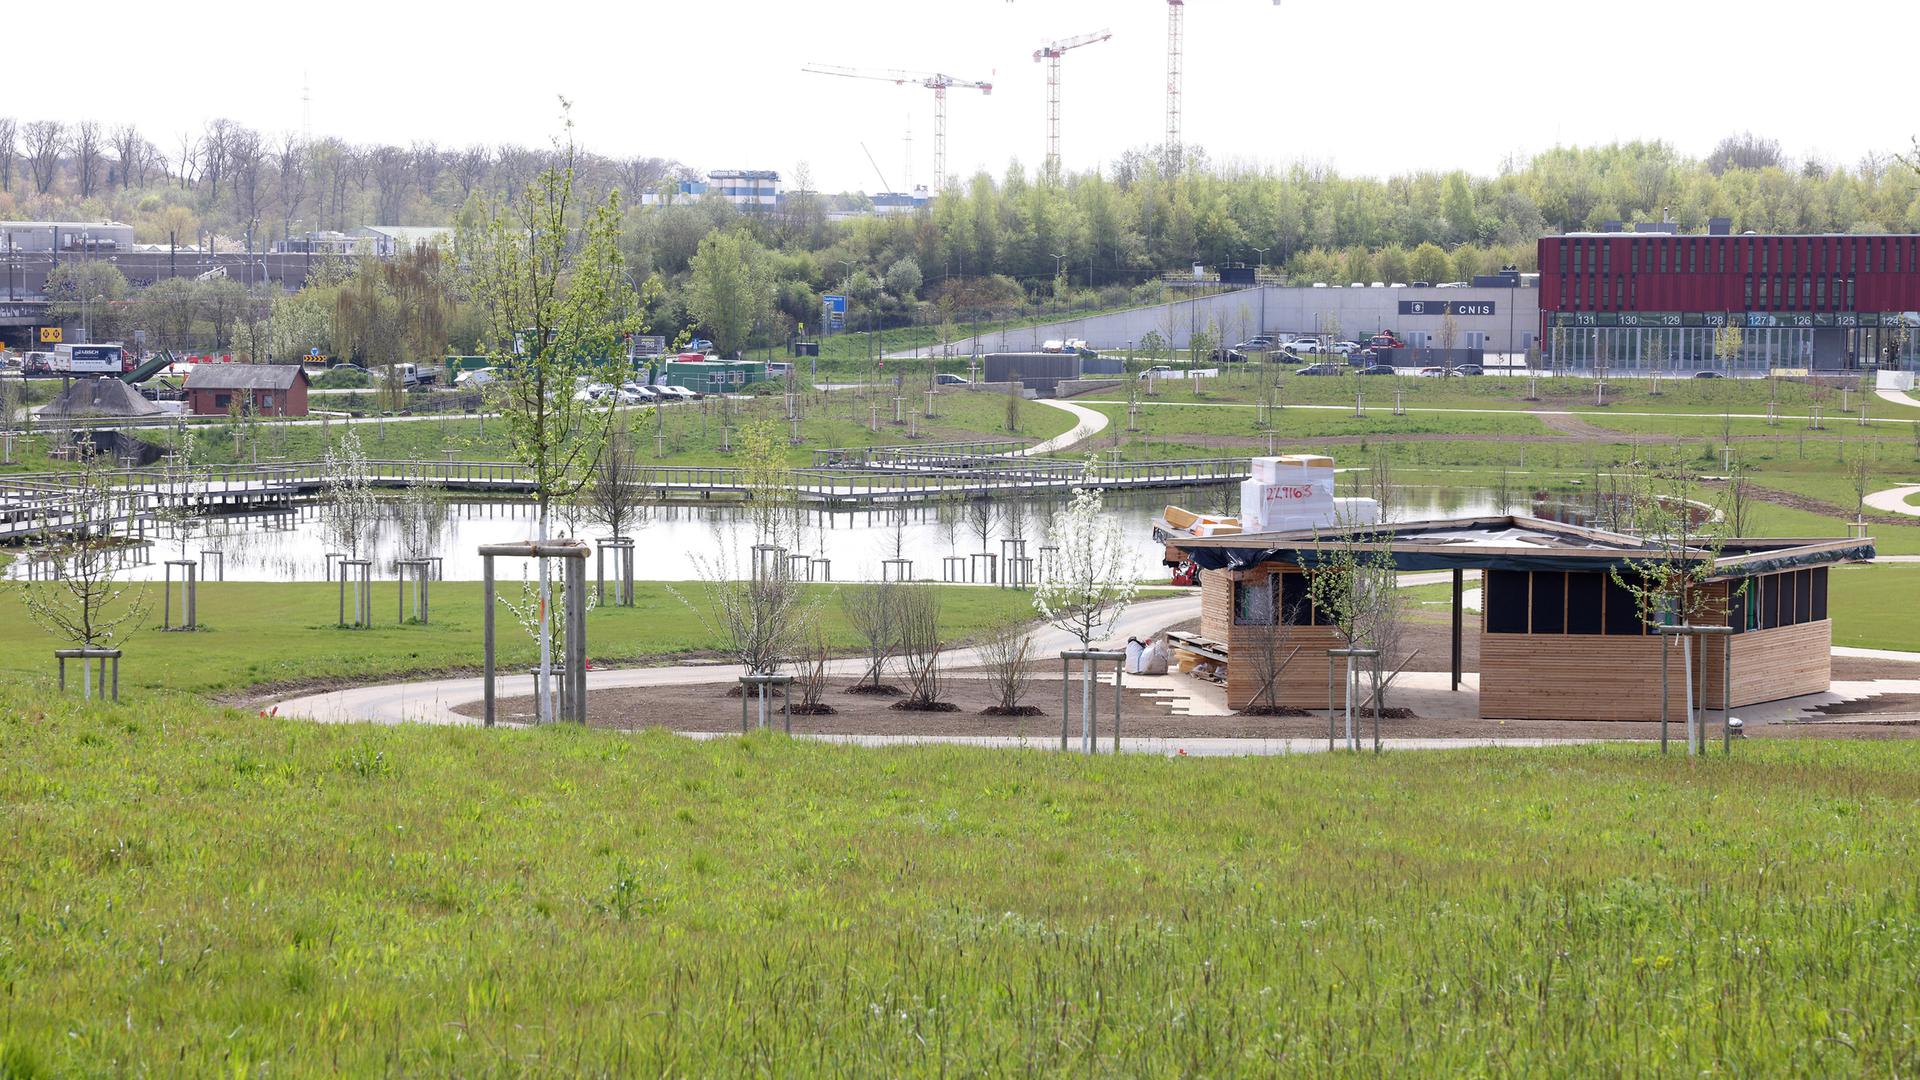 New 16.6 hectare park in Gasperich will open to the public in June 